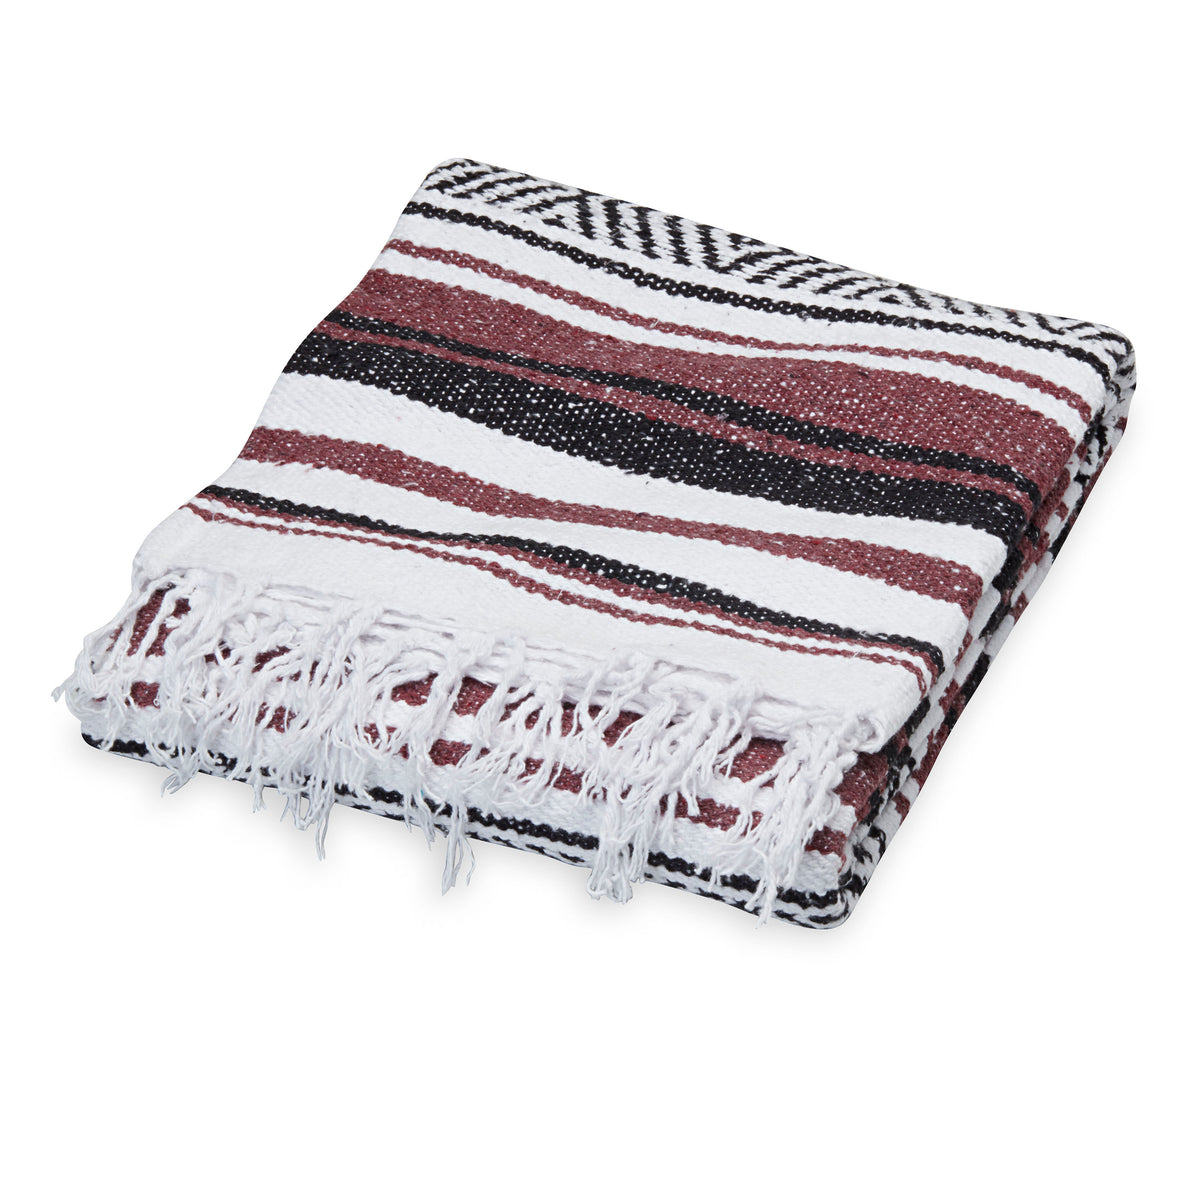 Traditional Mexican Woven Blanket Burgundy/White/Black folded